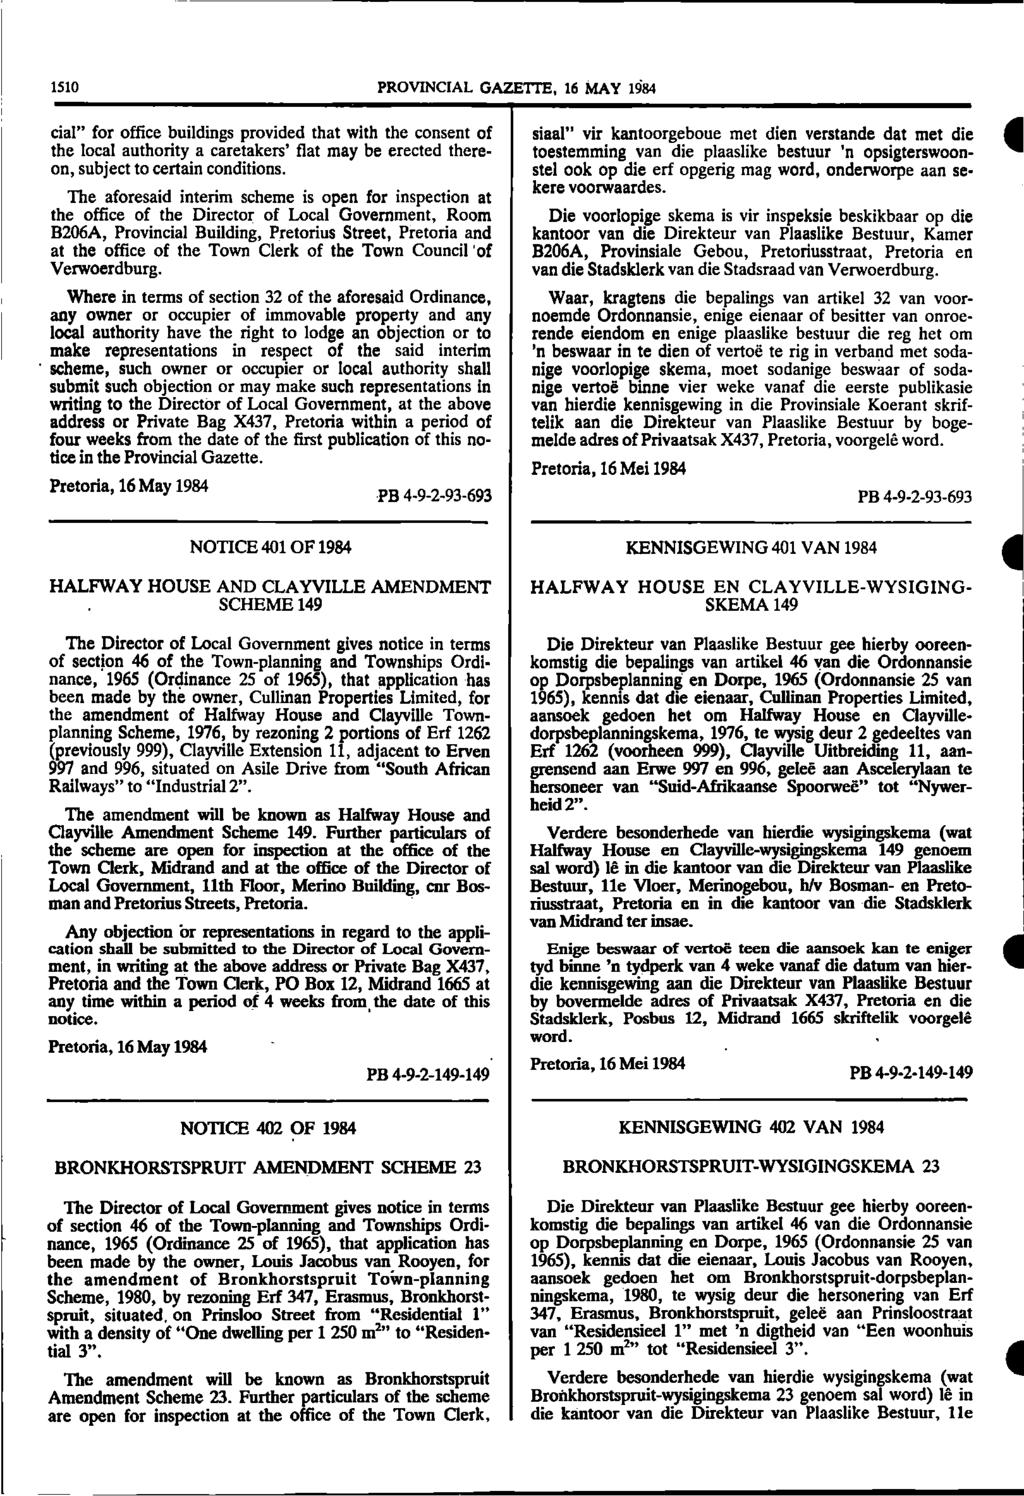 1510 PROVINCIAL GAZETTE, 16 MAY 1984 dal for office buildings provided that with the consent of the local authority a caretakers flat may be erected thereon, subject to certain conditions.